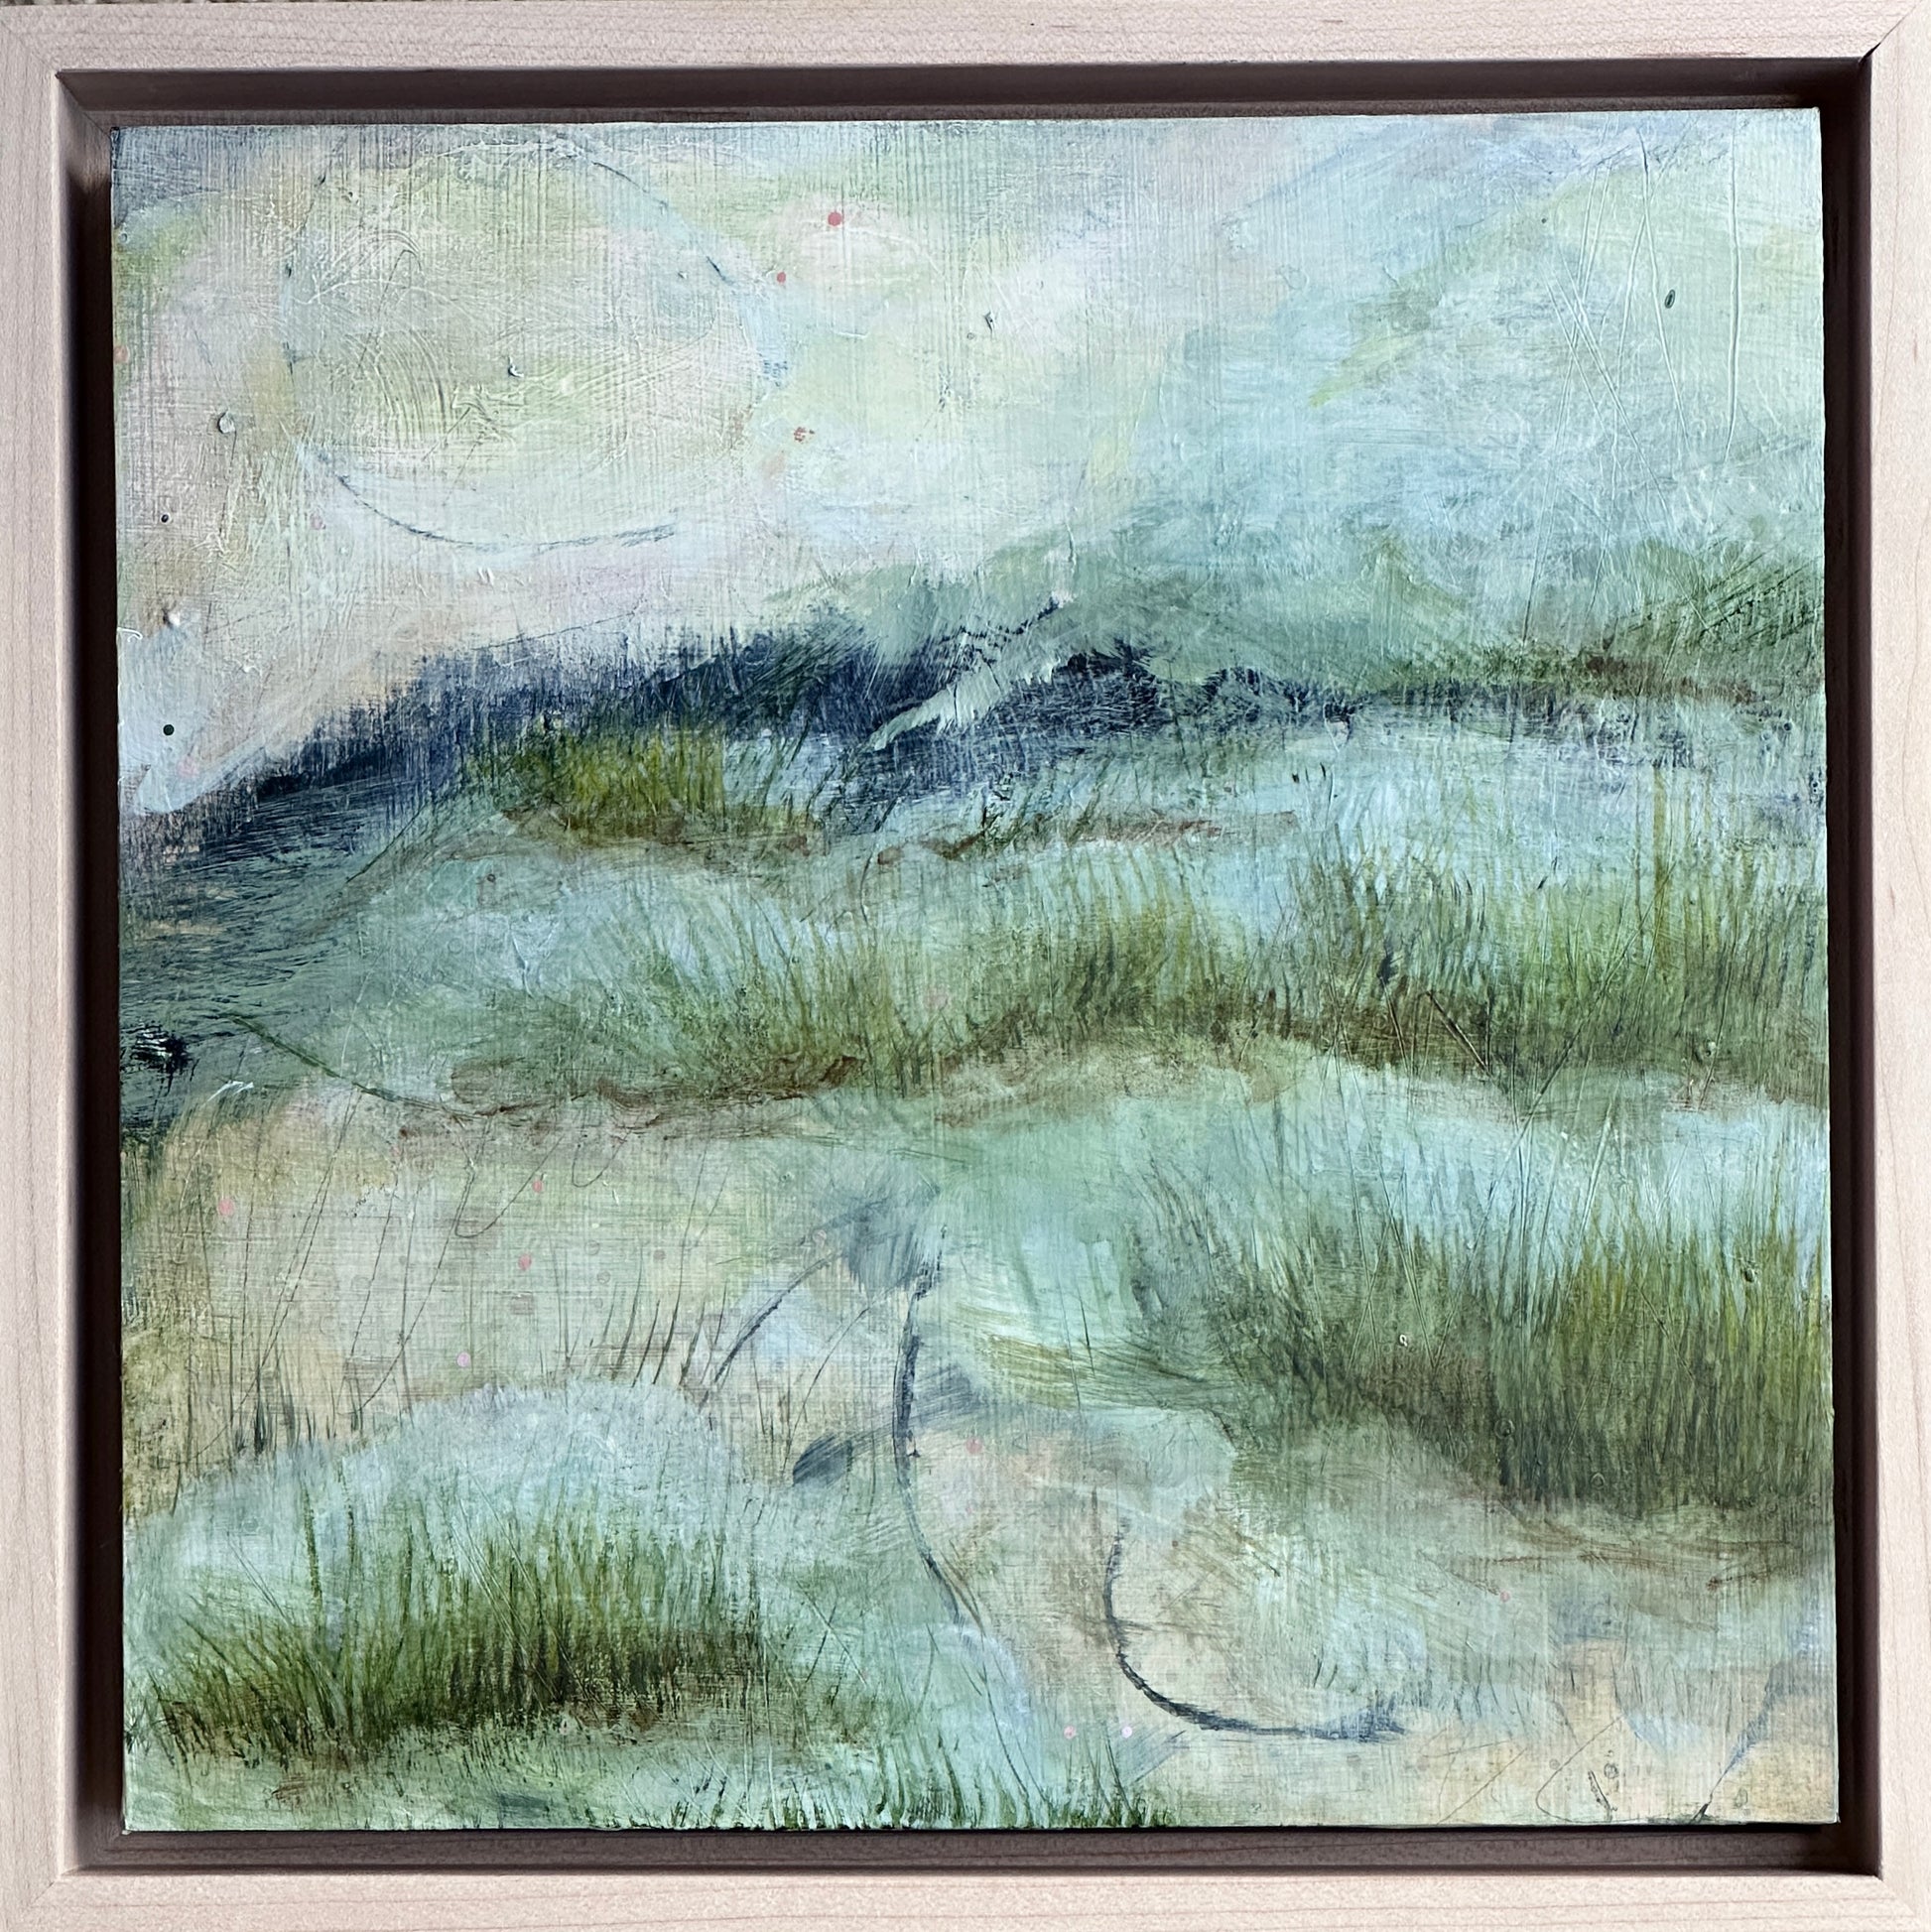 8 x 8 x 1.5-inch, framed, impression of marshes fading away into the sea.  Acrylic painting on cradled panel with natural wood frame.  By Cumming, GA artist, Juanita Bellavance. Part of our 25 Days of Minis 2022 collection.  Collect them all!